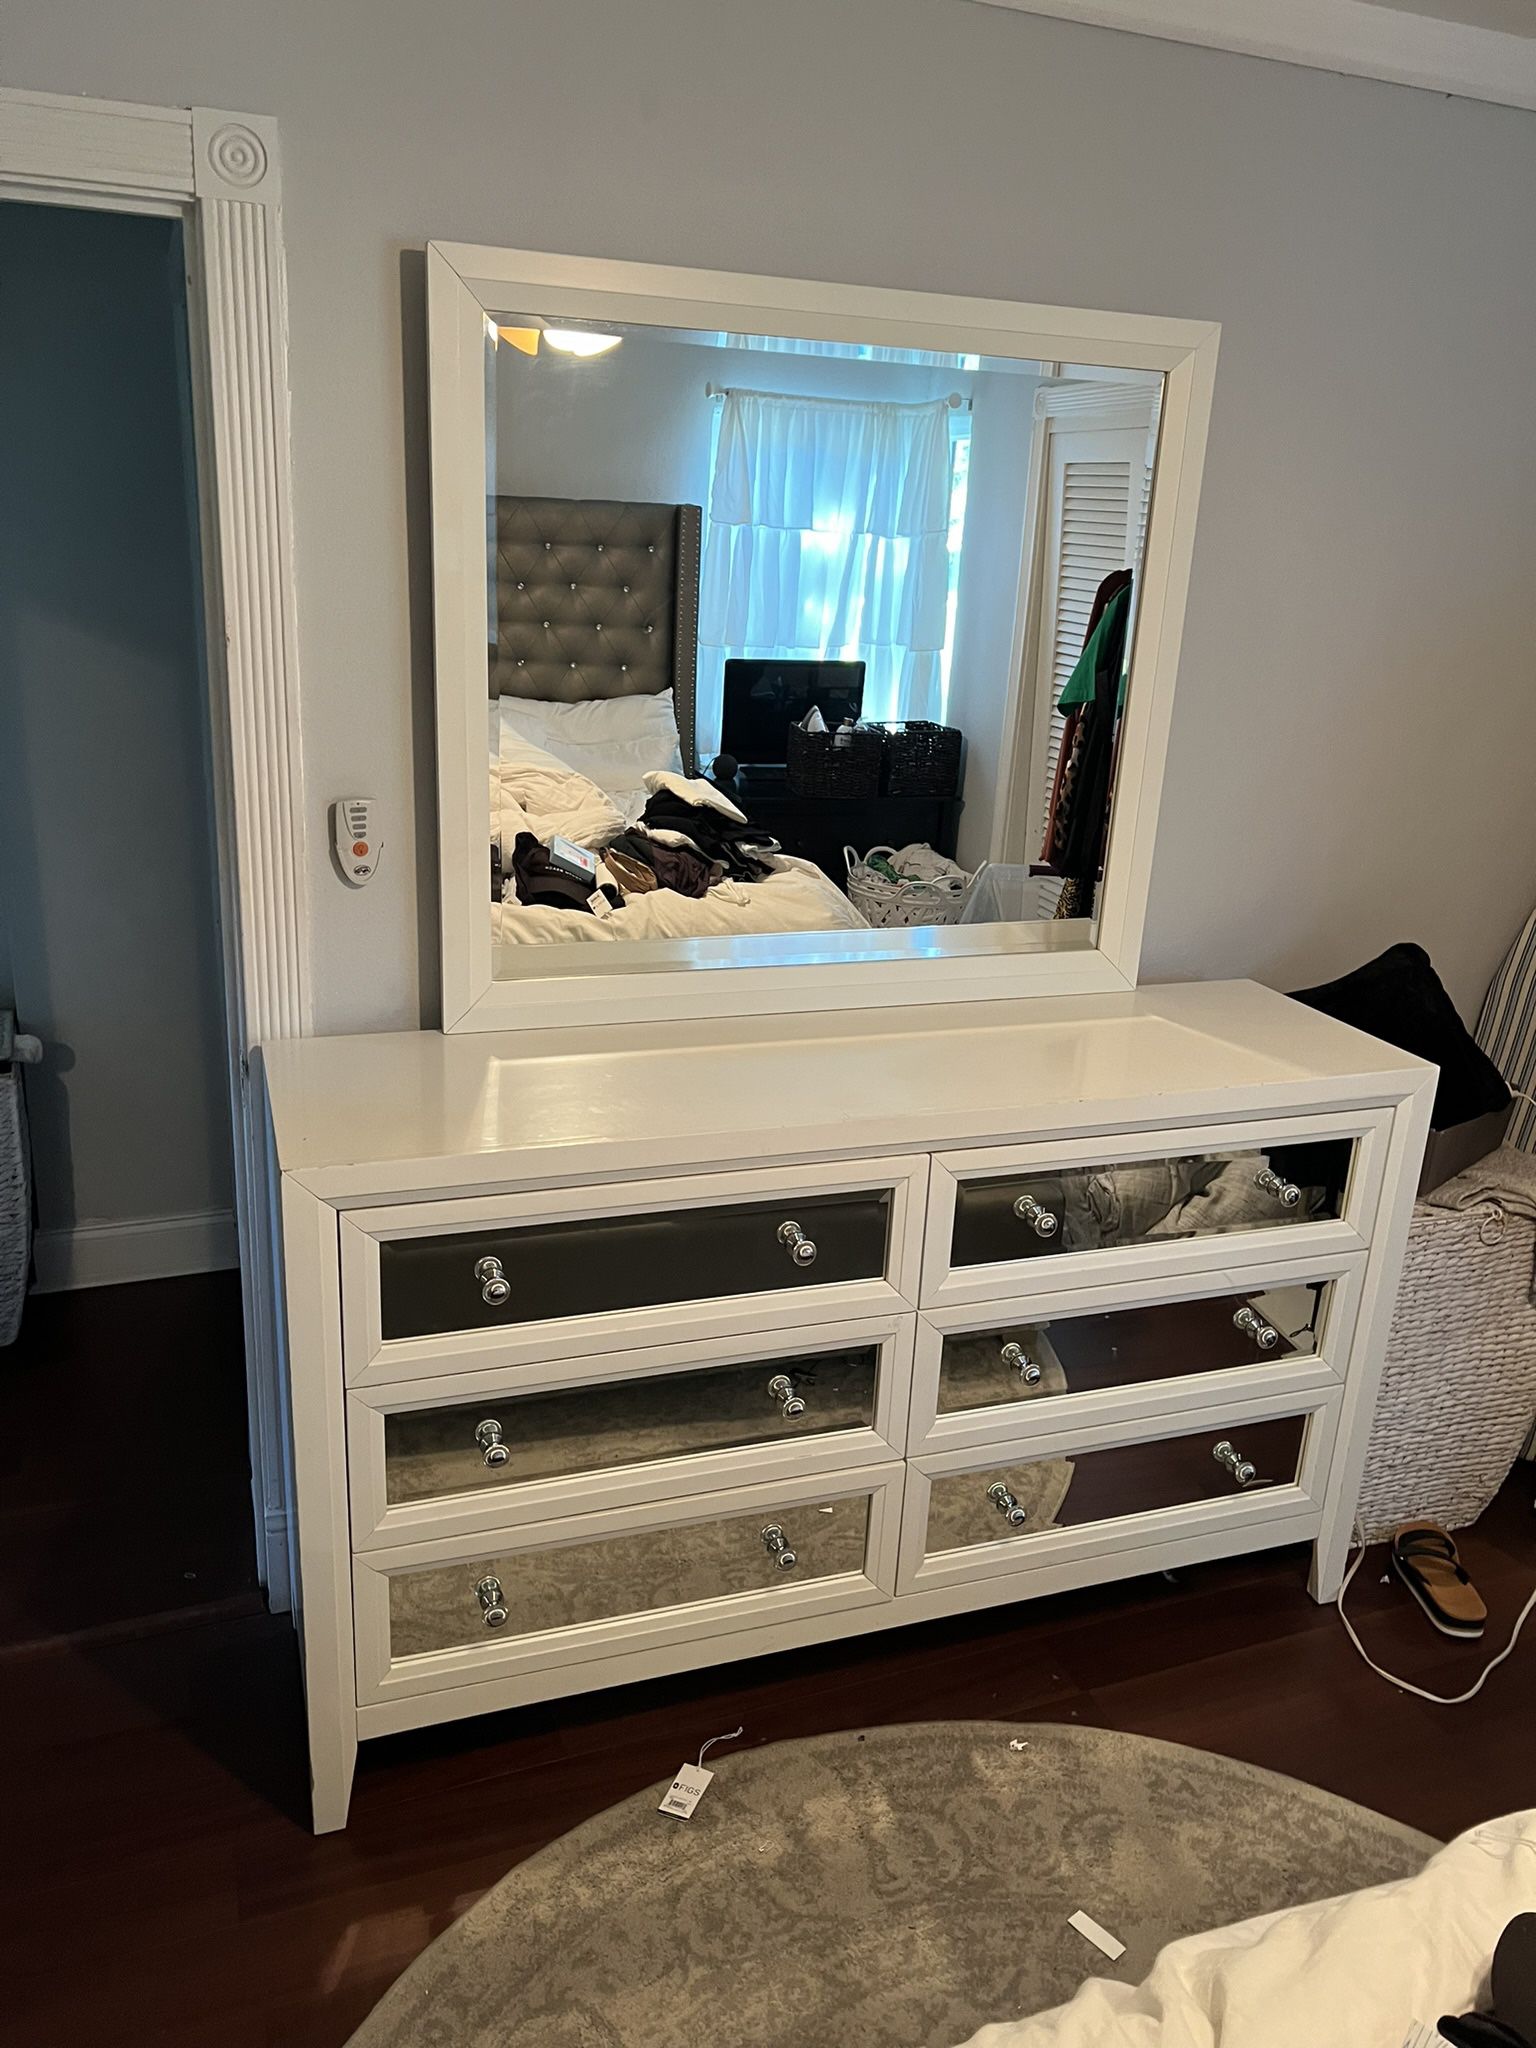 Dresser drawer with mirror finish and vanity mirror